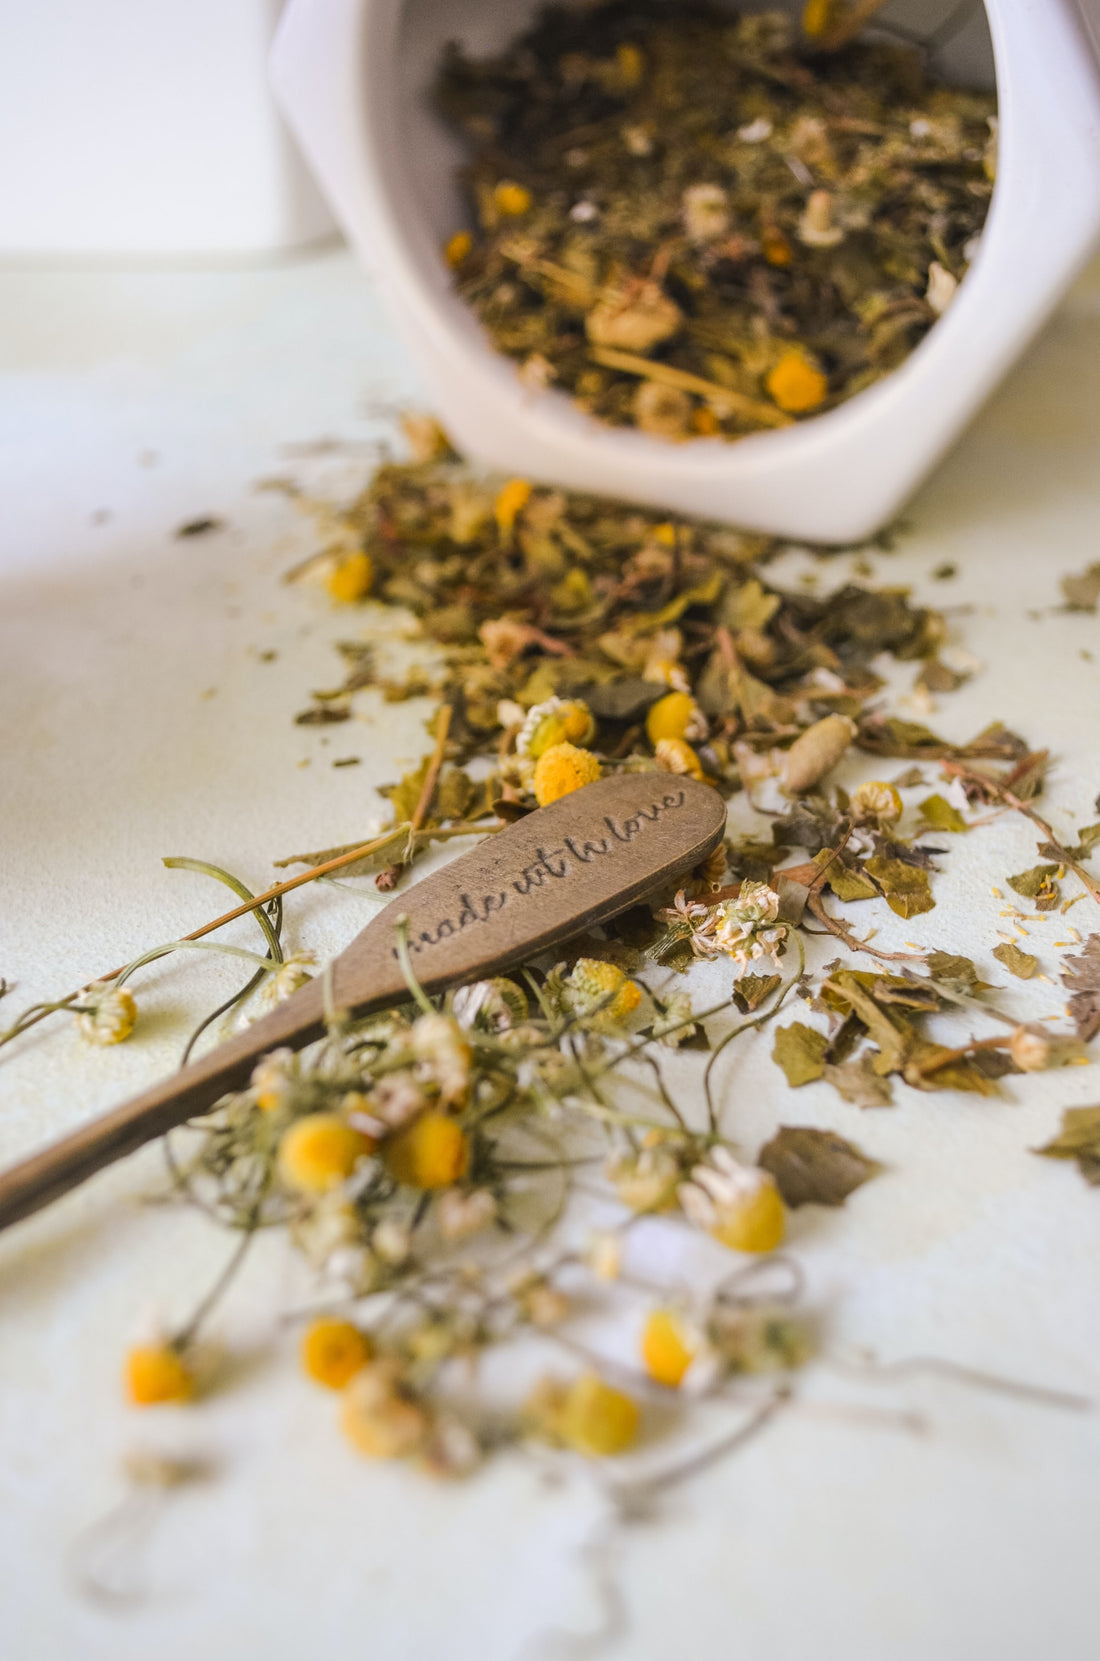 ROLE OF HERBS IN BEAUTY COSMETICS